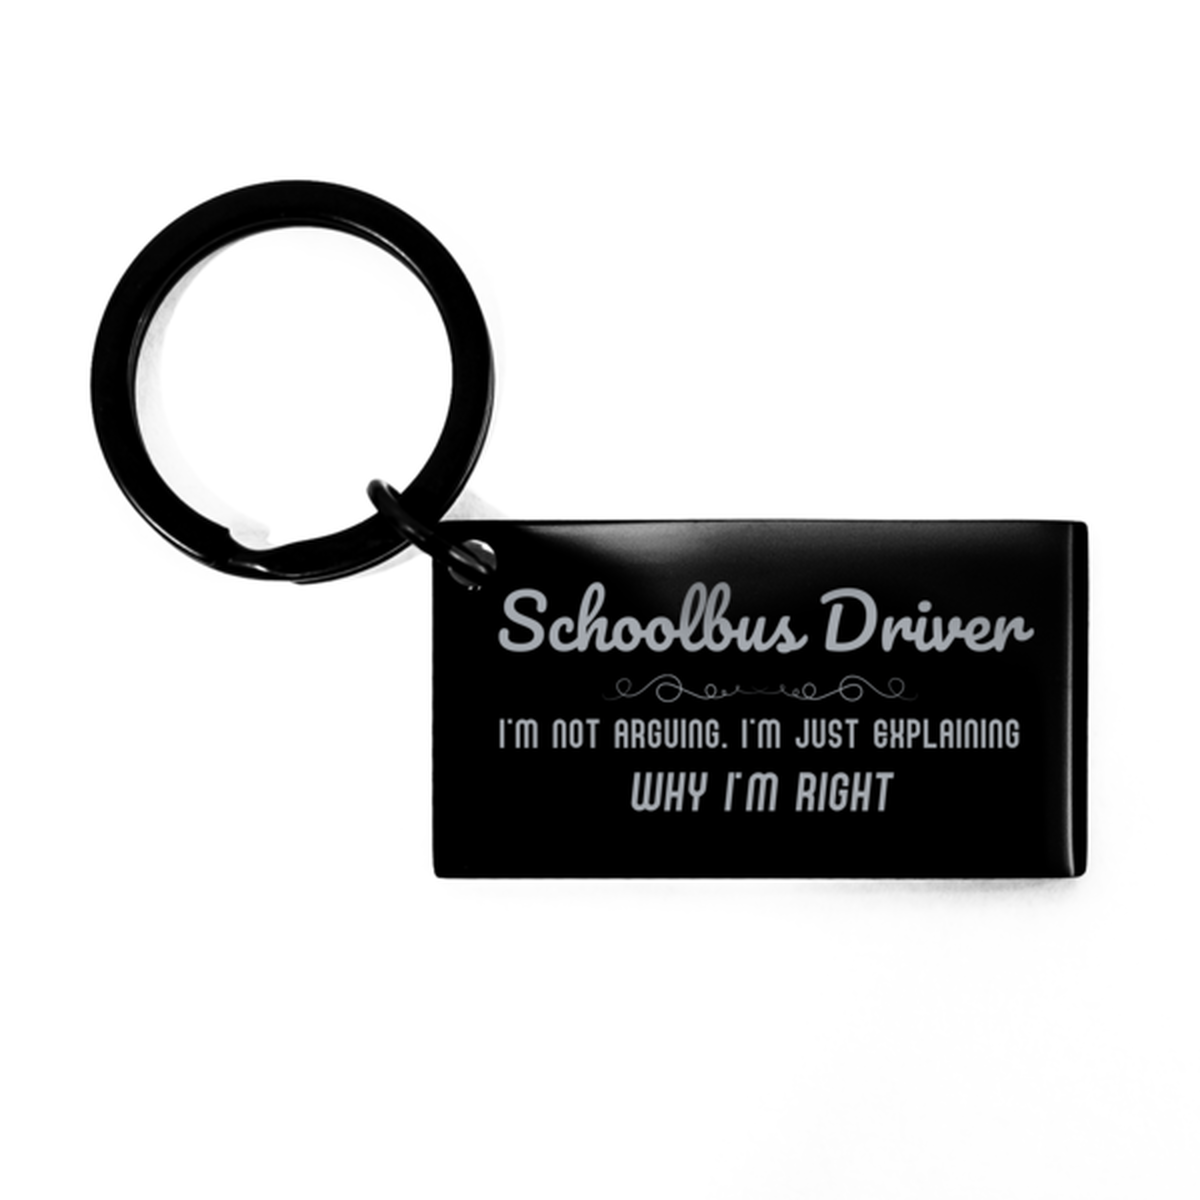 Schoolbus Driver I'm not Arguing. I'm Just Explaining Why I'm RIGHT Keychain, Funny Saying Quote Schoolbus Driver Gifts For Schoolbus Driver Graduation Birthday Christmas Gifts for Men Women Coworker